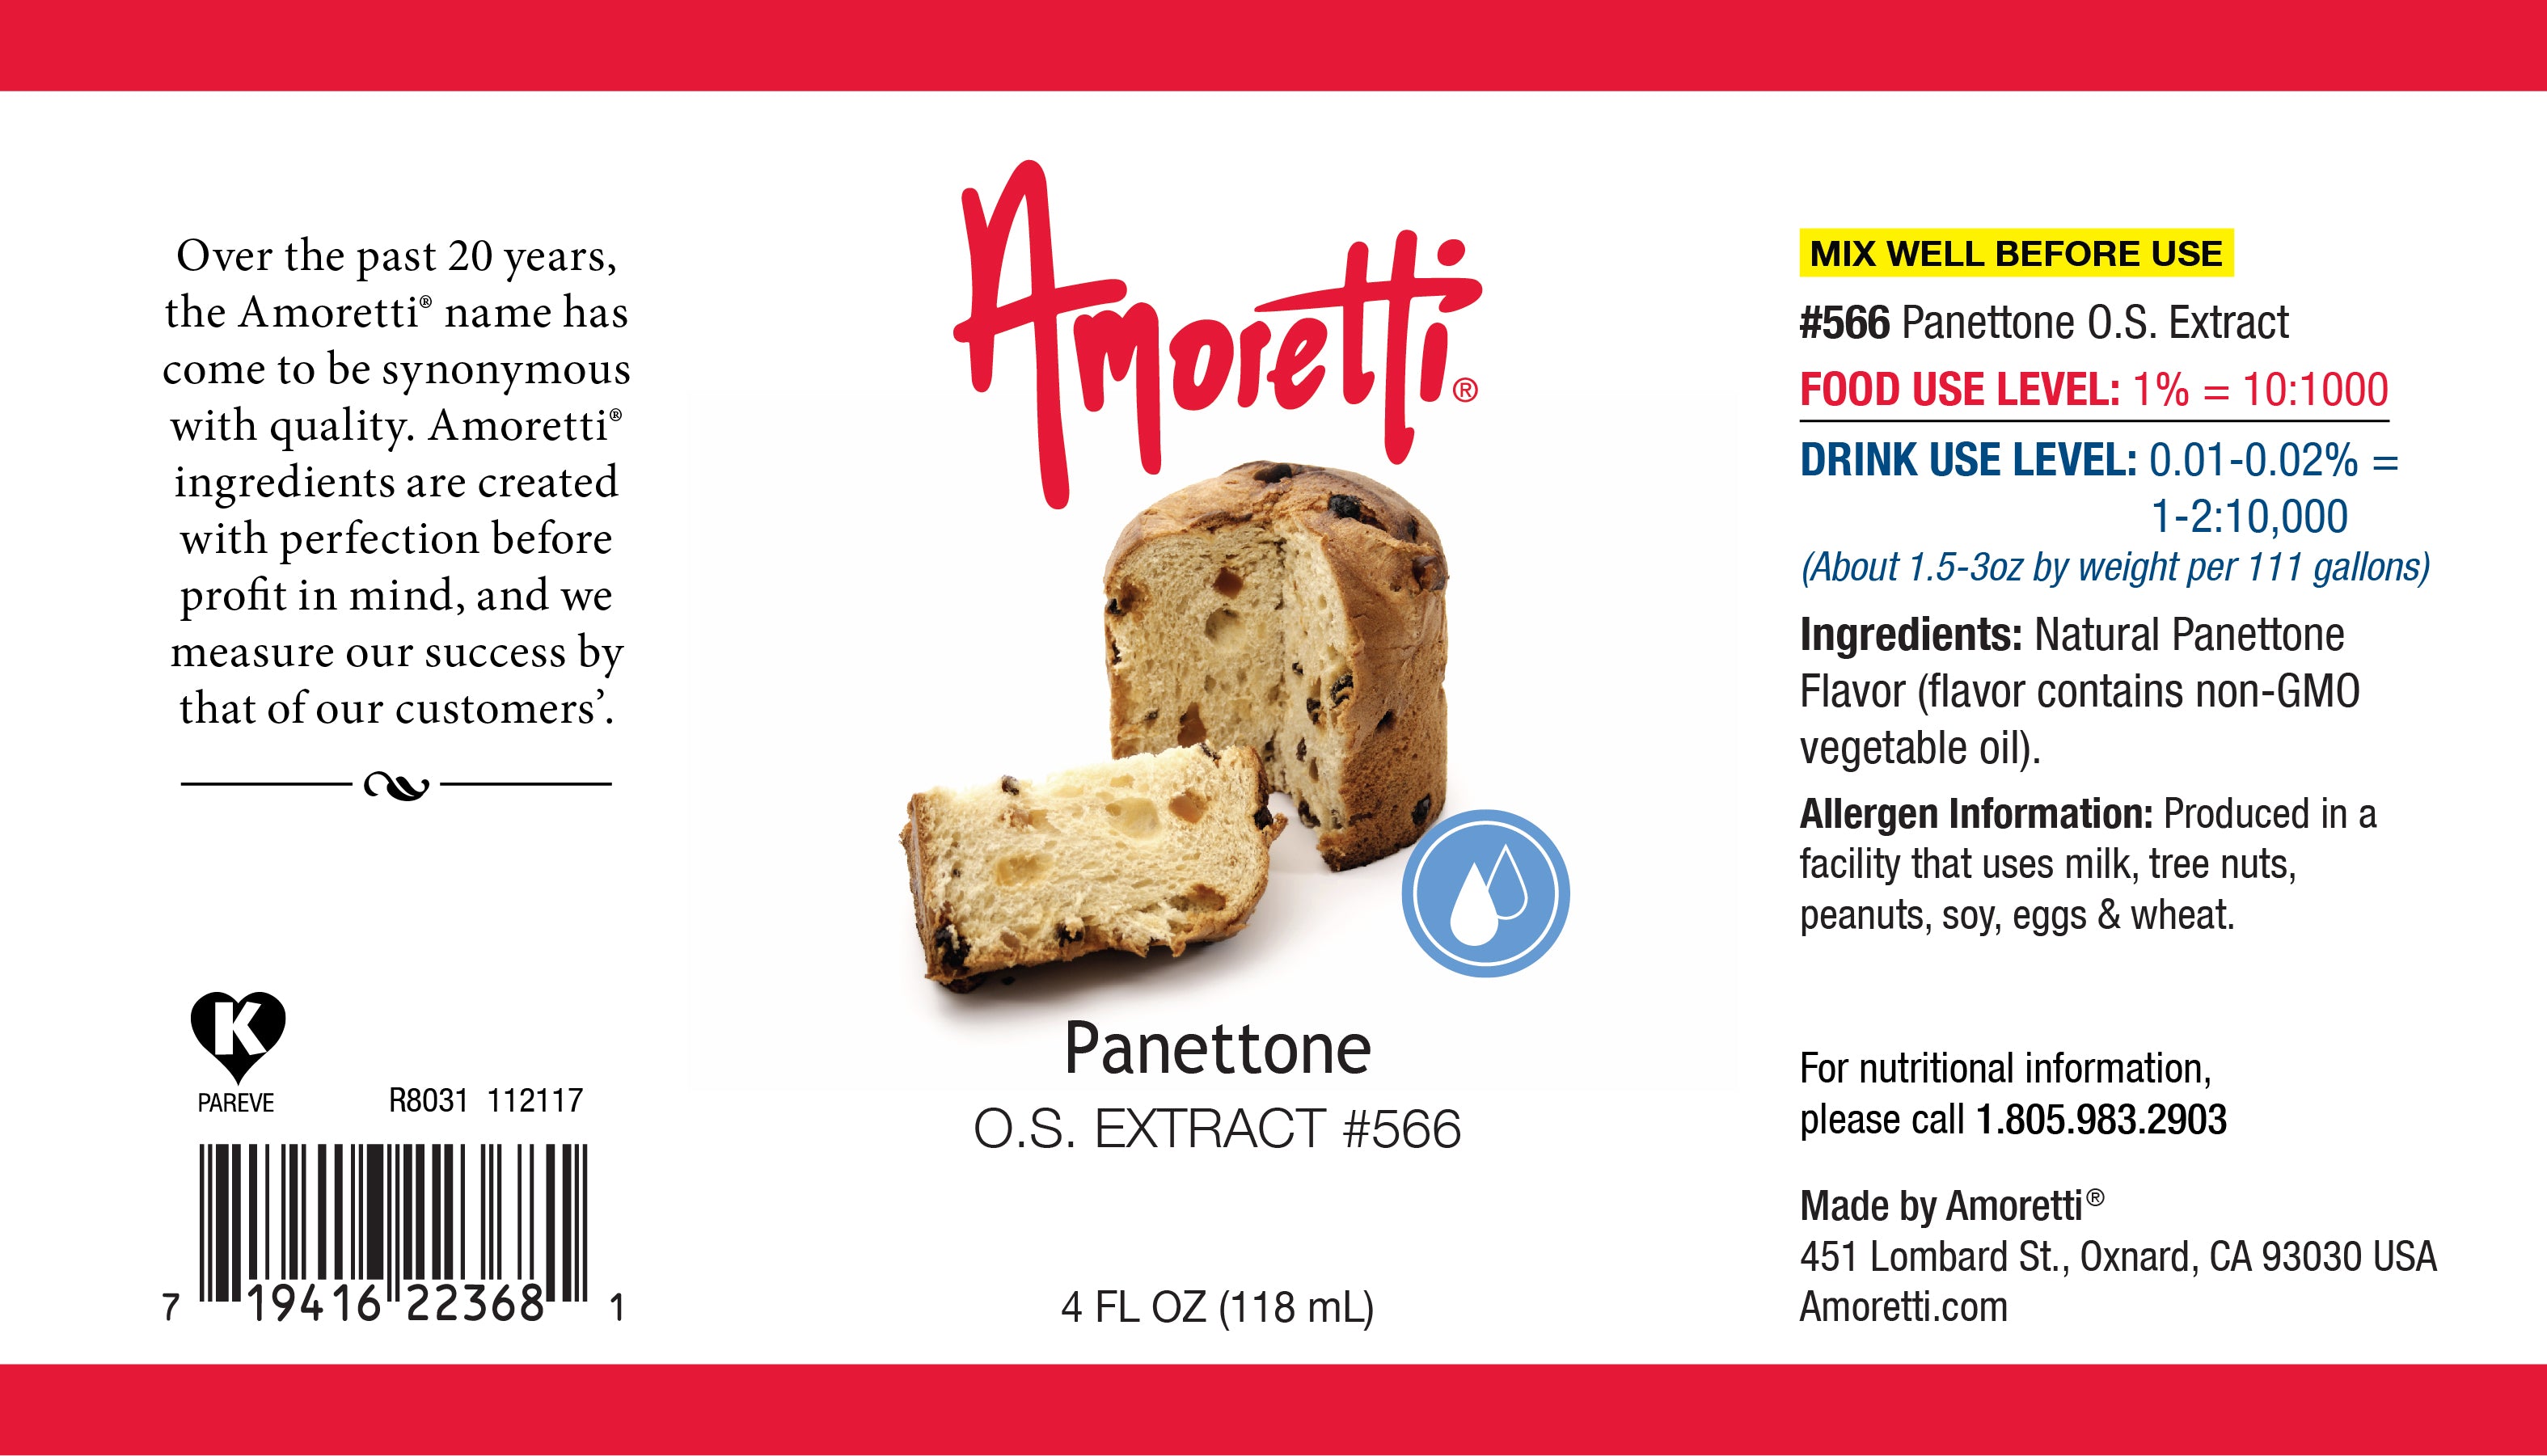 Panettone Extract Oil Soluble